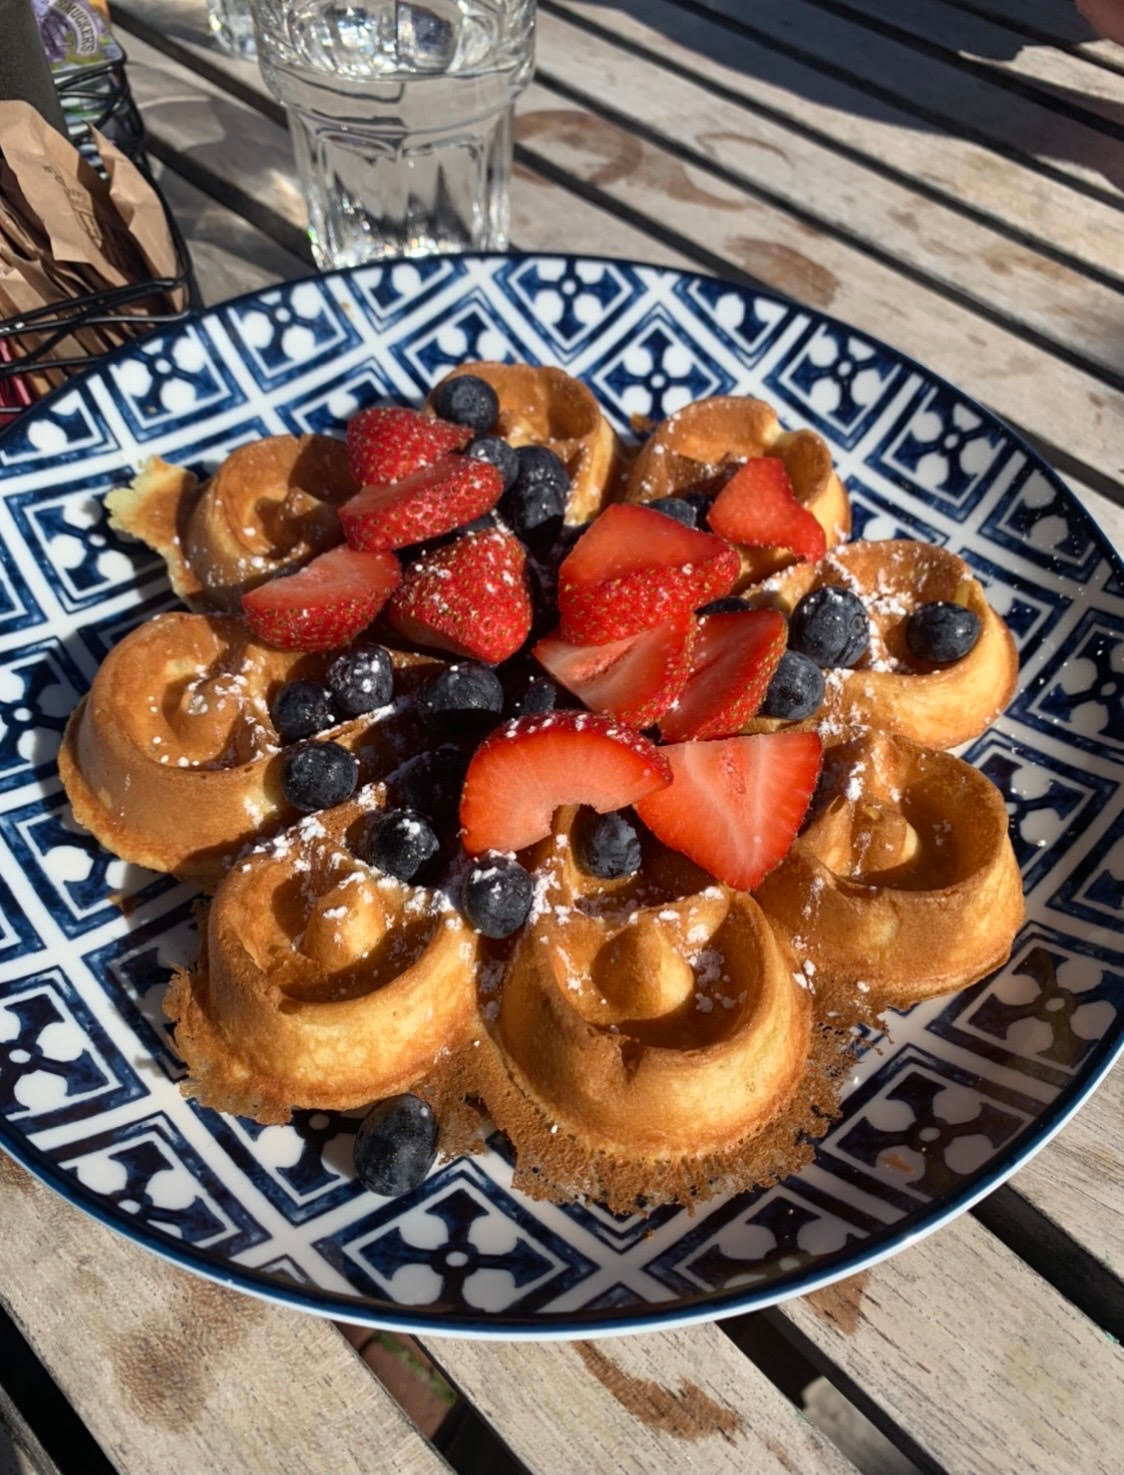 The Belgian waffle at Island Kitchen can be served with fresh berries, chocolate chips or Bananas Foster-style with caramel sauce and pecans.